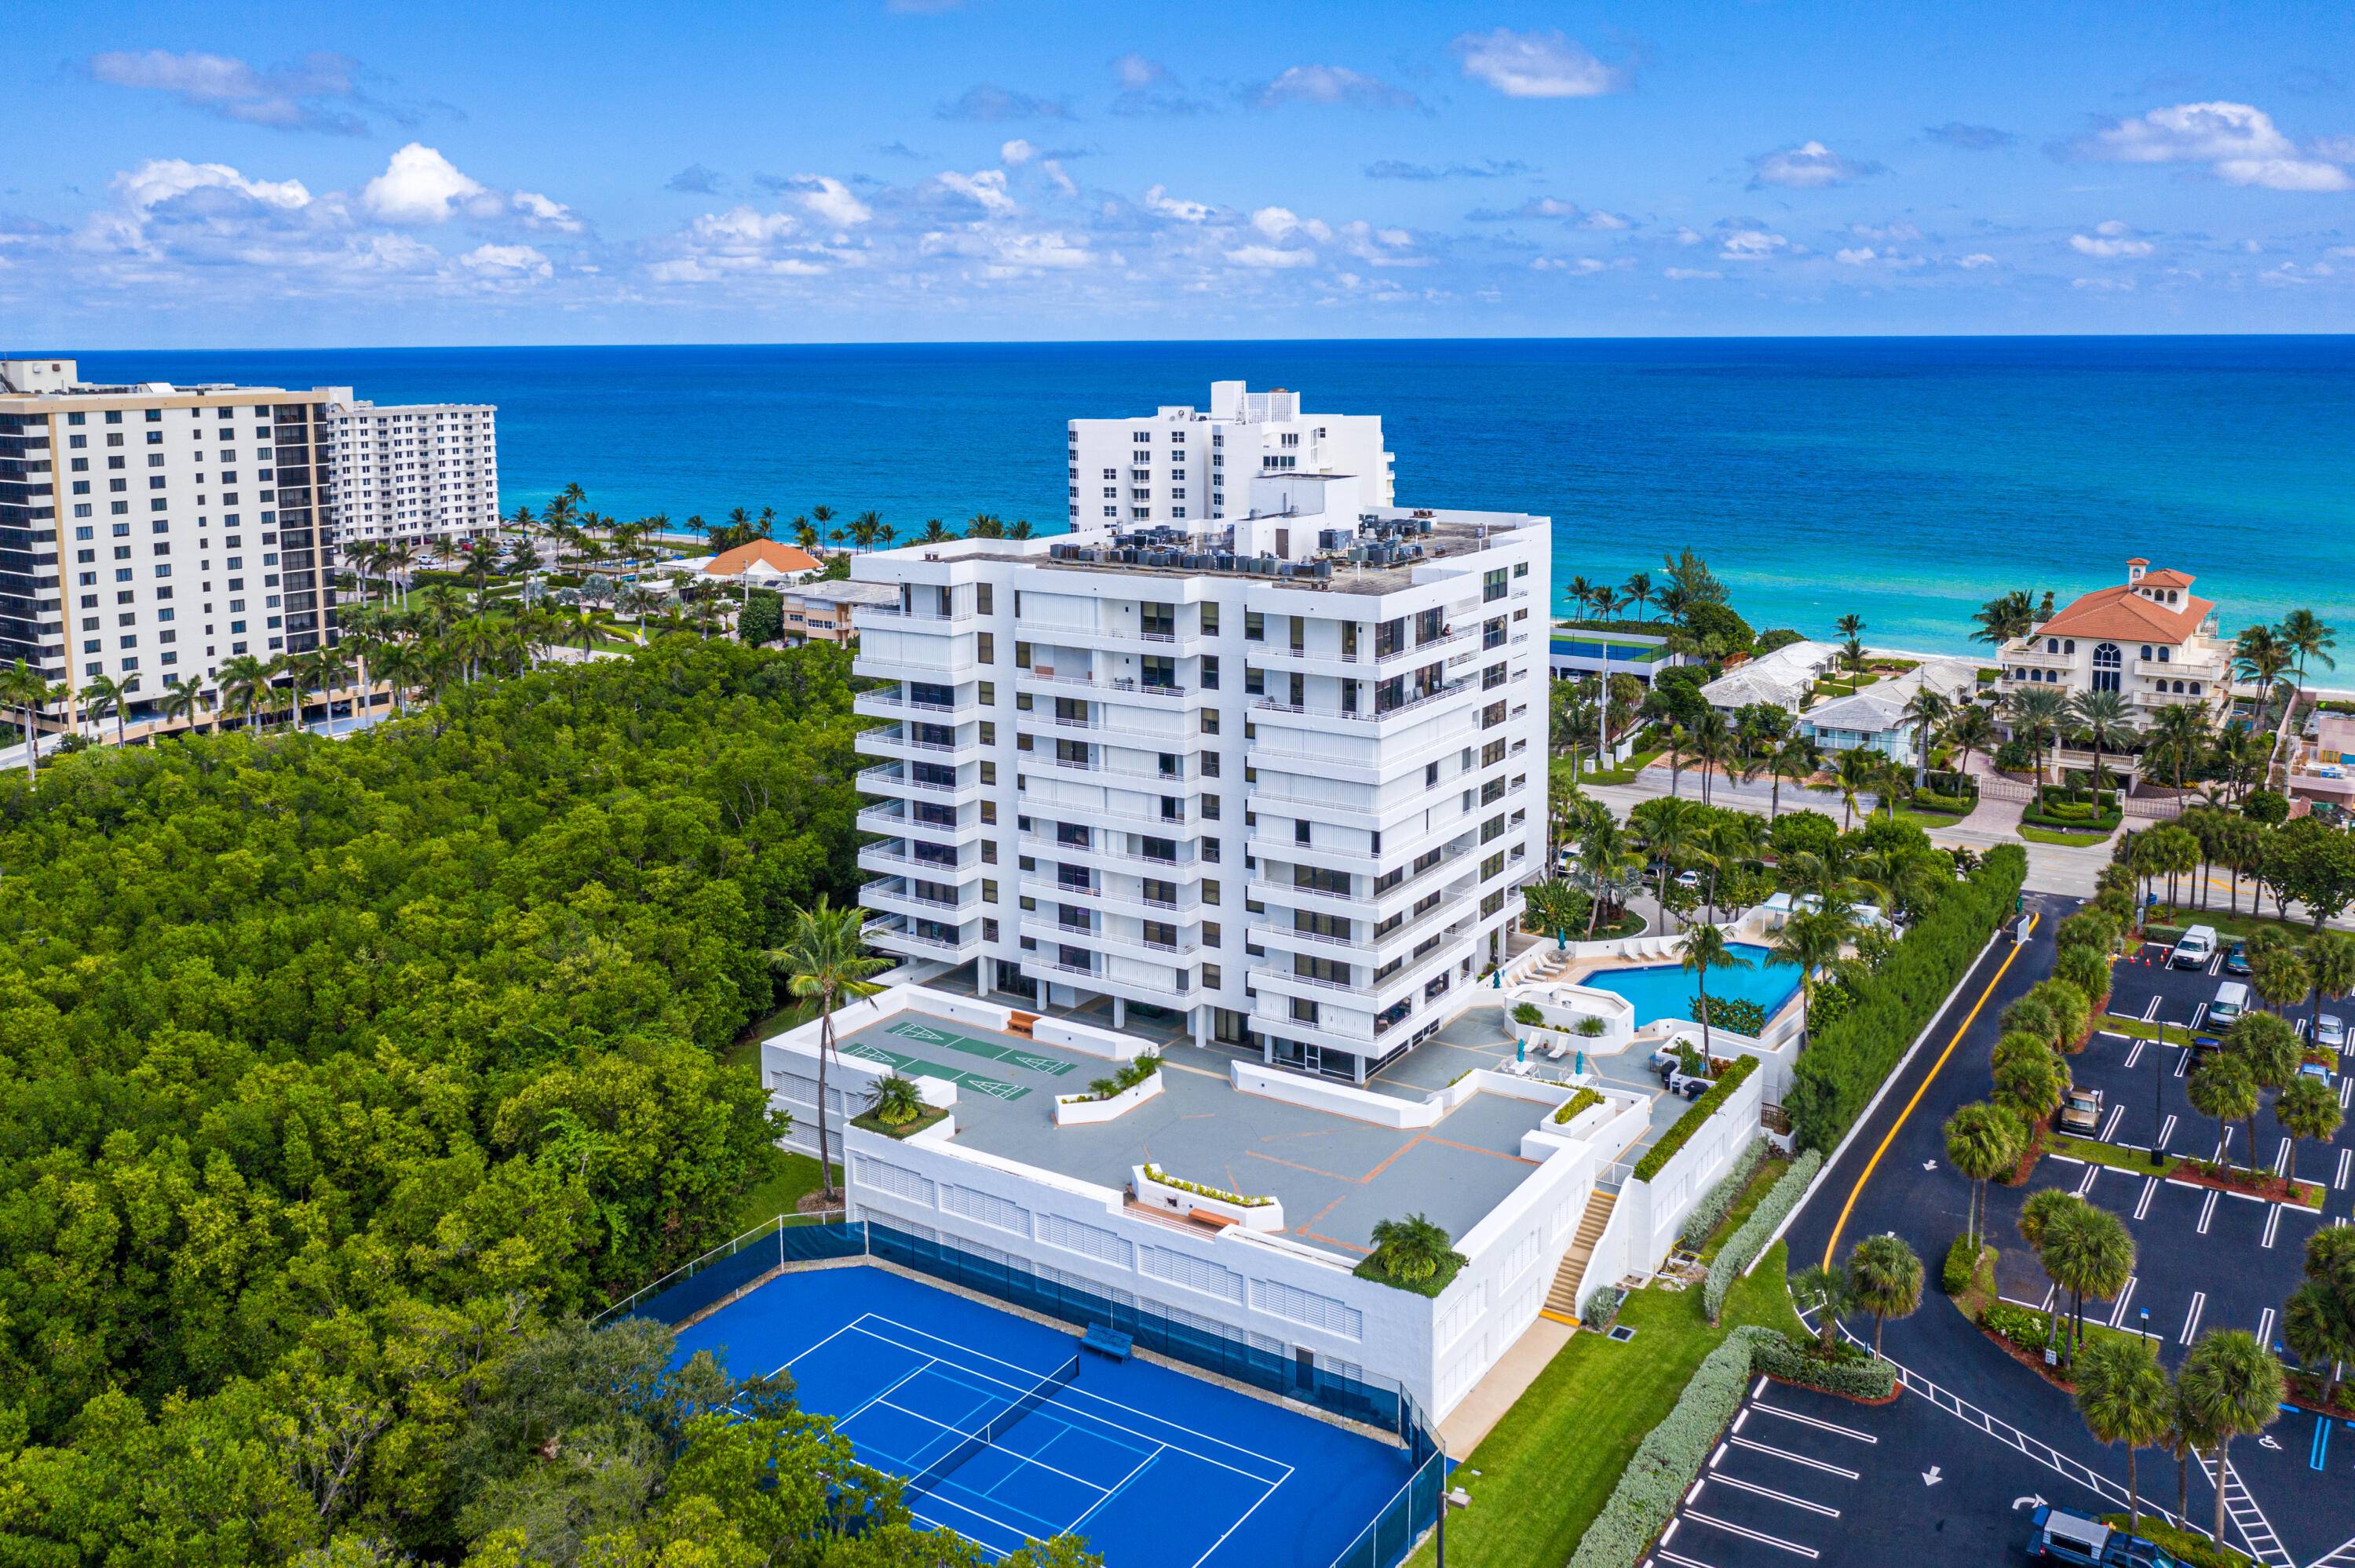 Ocean Views Blue Skies ! Enjoy watching the Sunrise from your 2 Private covered balconies, beautiful SPACIOUS CLEAN 2 BR, 2BA, Furnished Seasonal condo just a stroll away to beach, ...